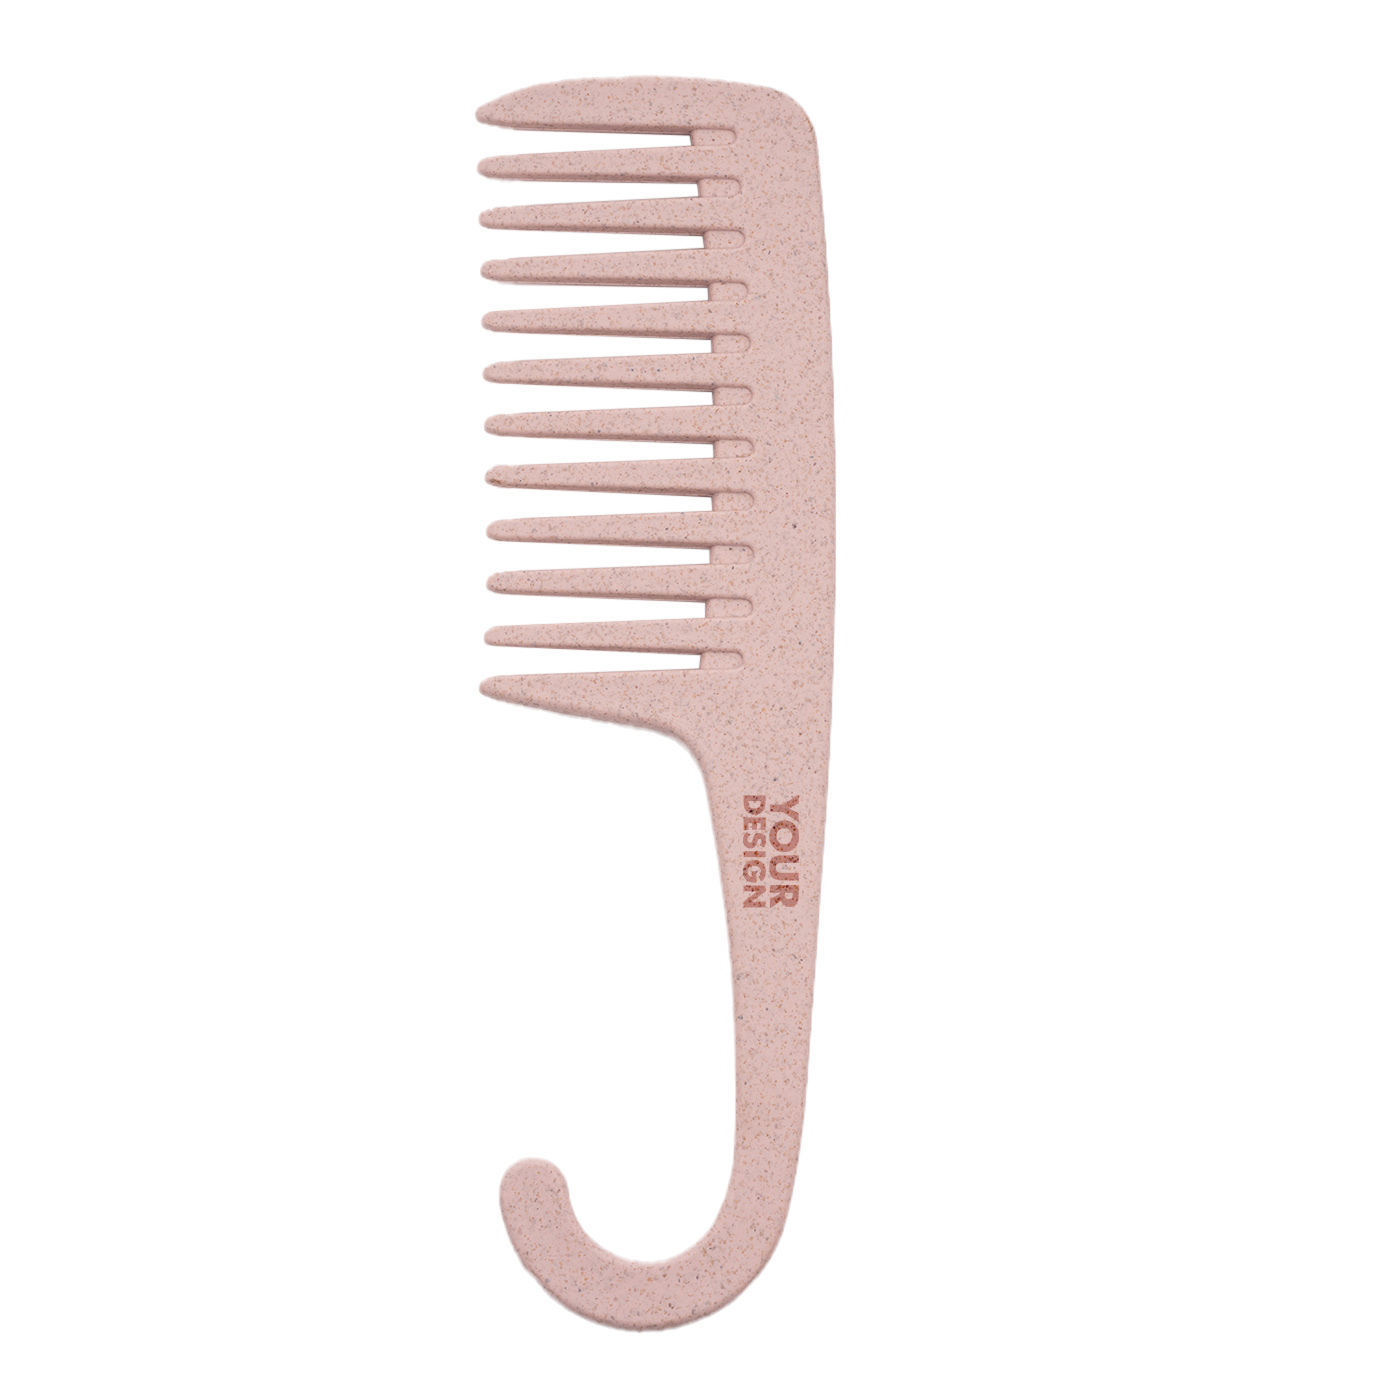 Wide Tooth Wheat Straw Comb With Curved Hook Handle